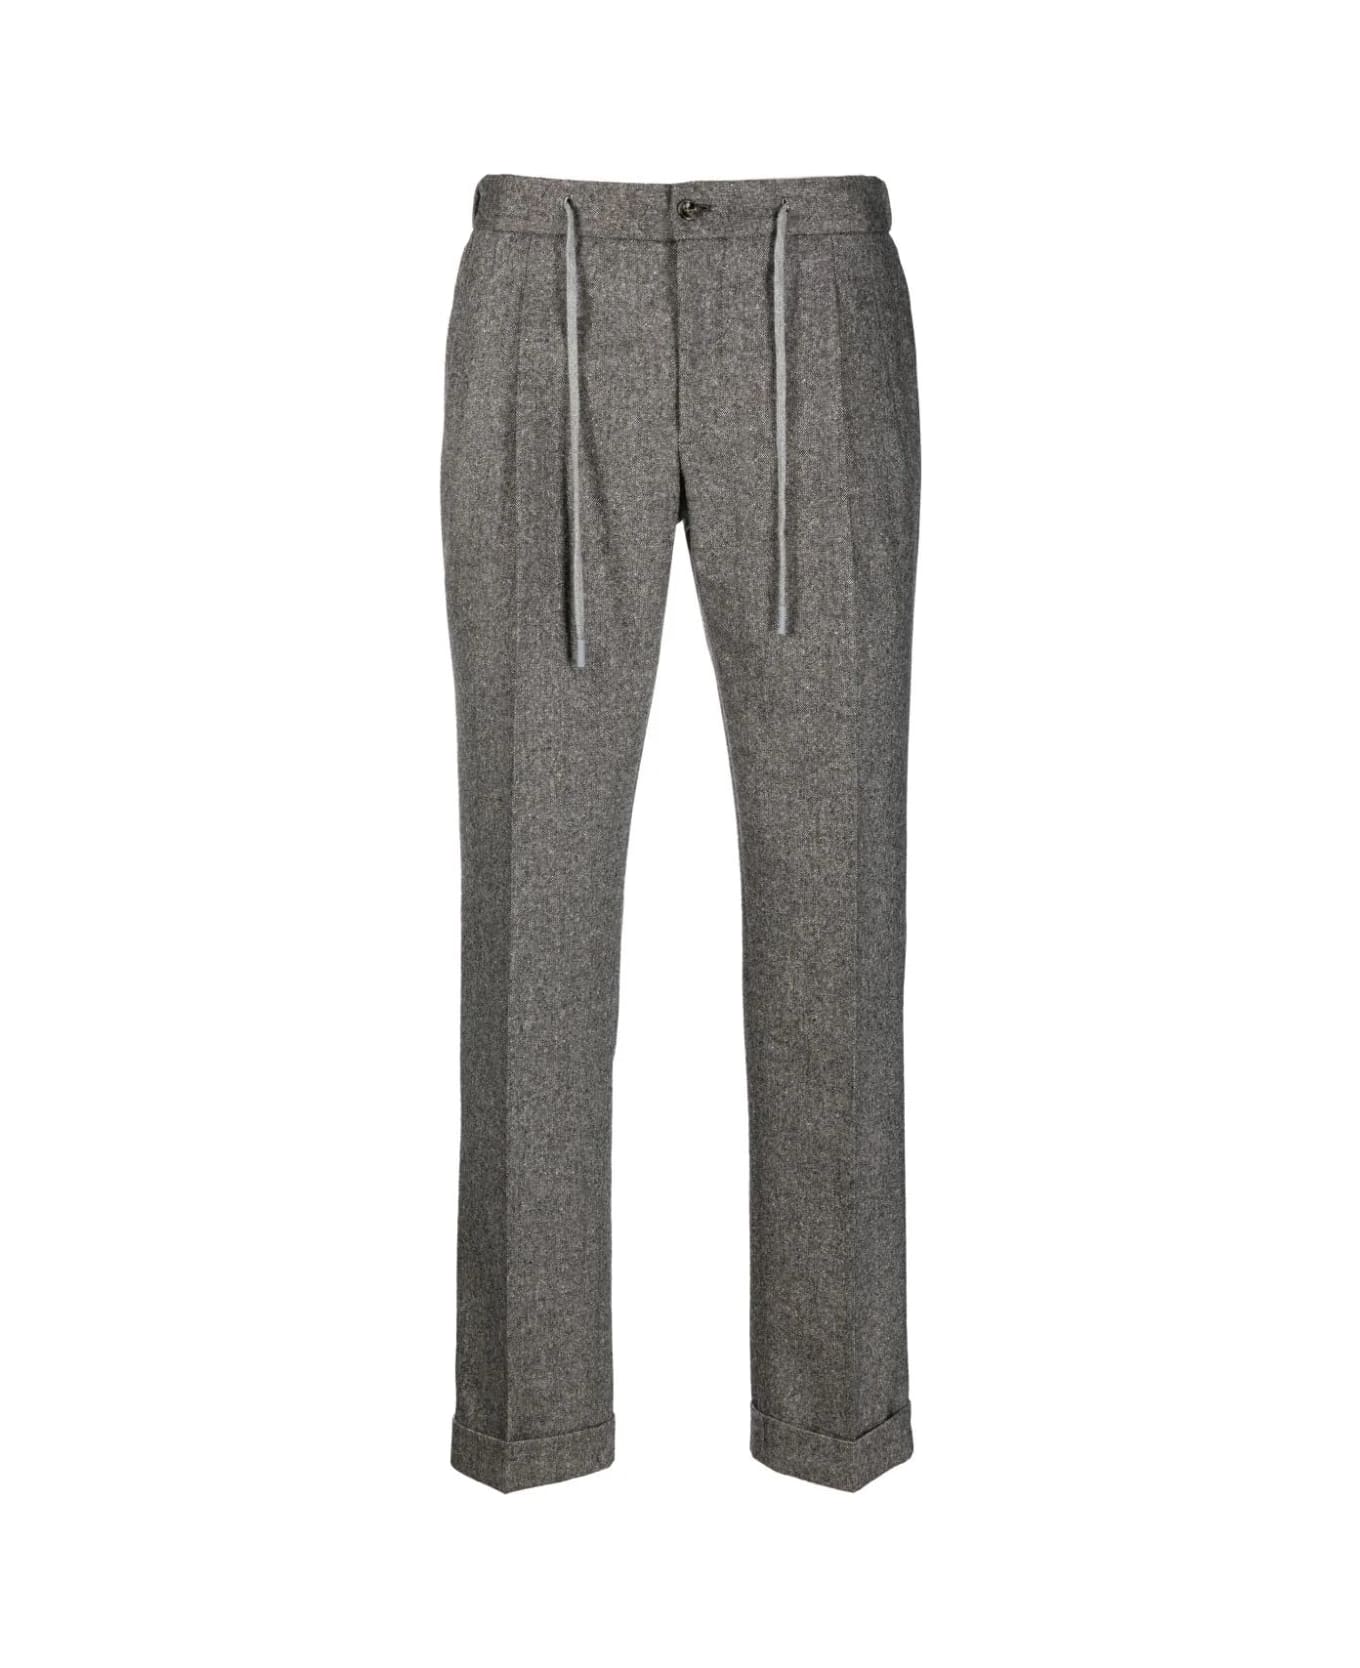 Barba Napoli Roma Coulisse Trousers - Tweed